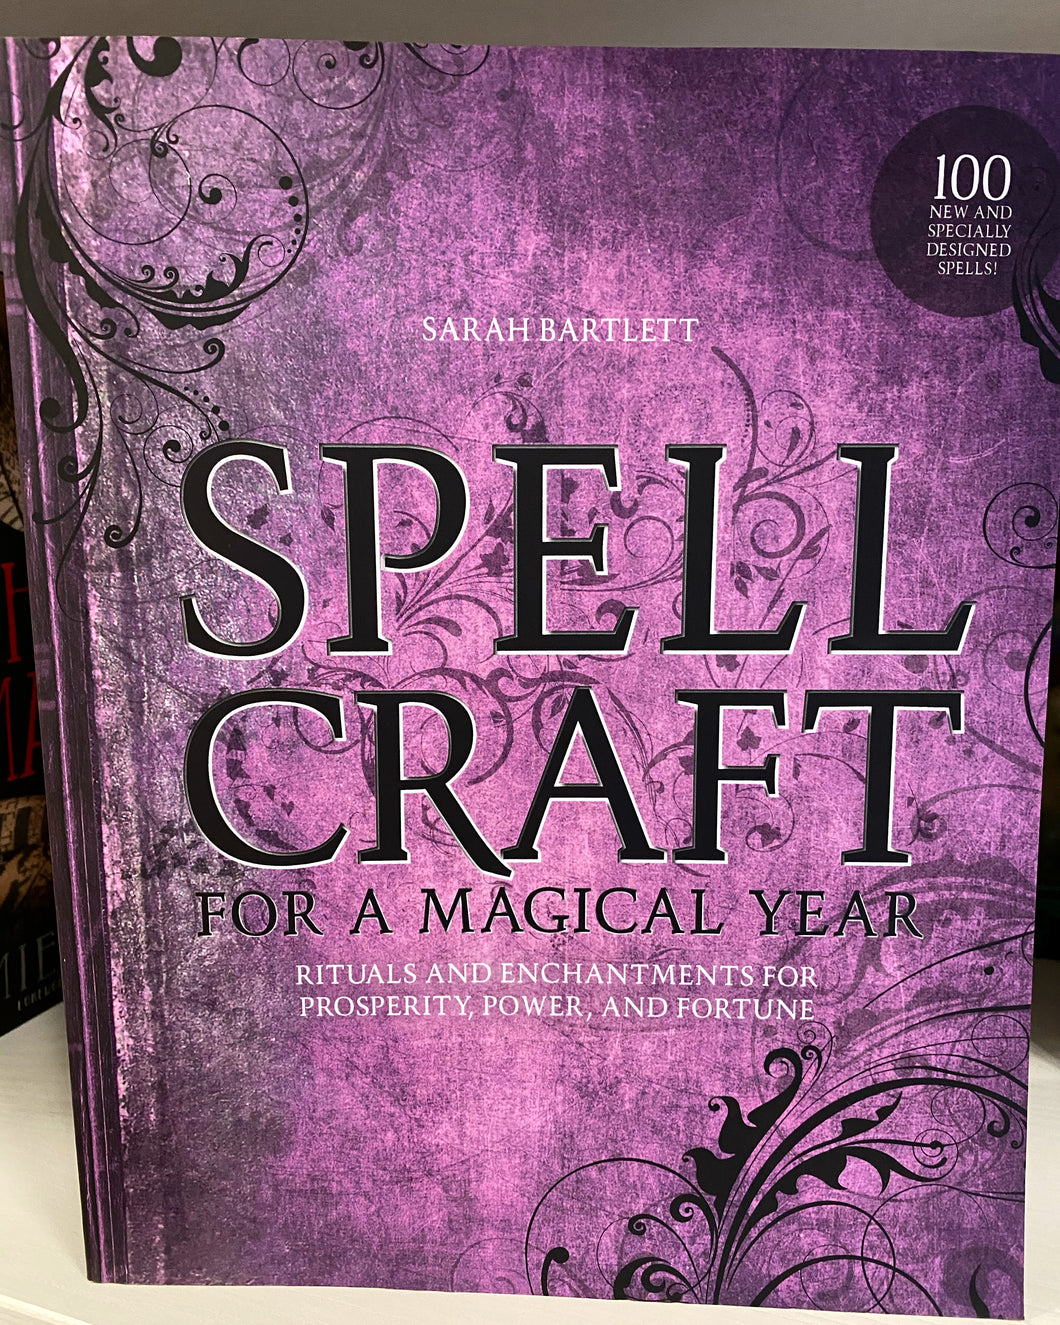 Spellcraft - For a magical year